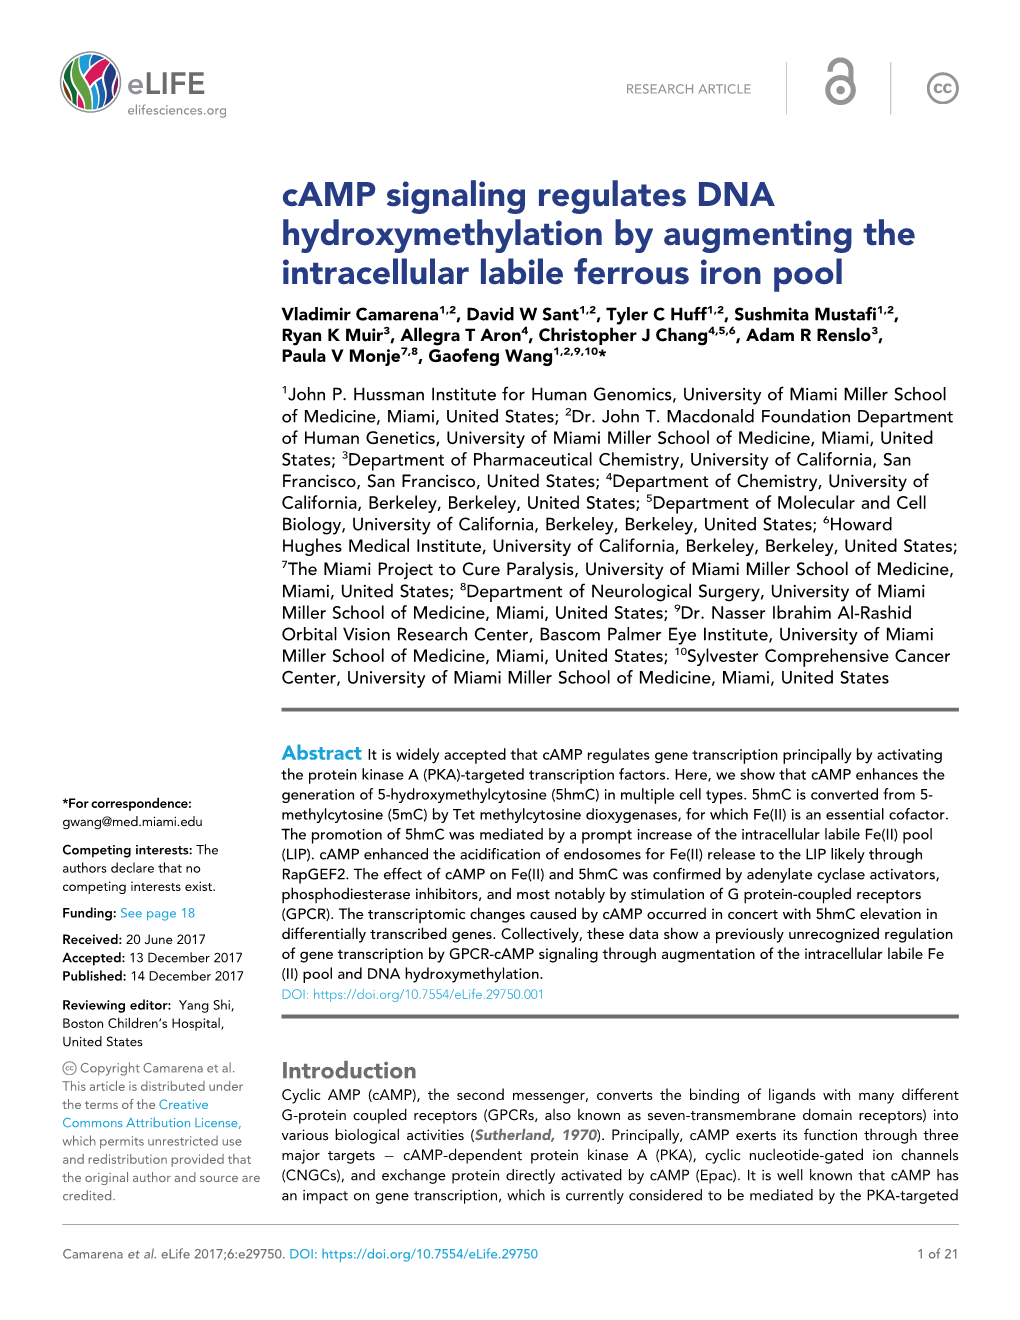 Camp Signaling Regulates DNA Hydroxymethylation by Augmenting